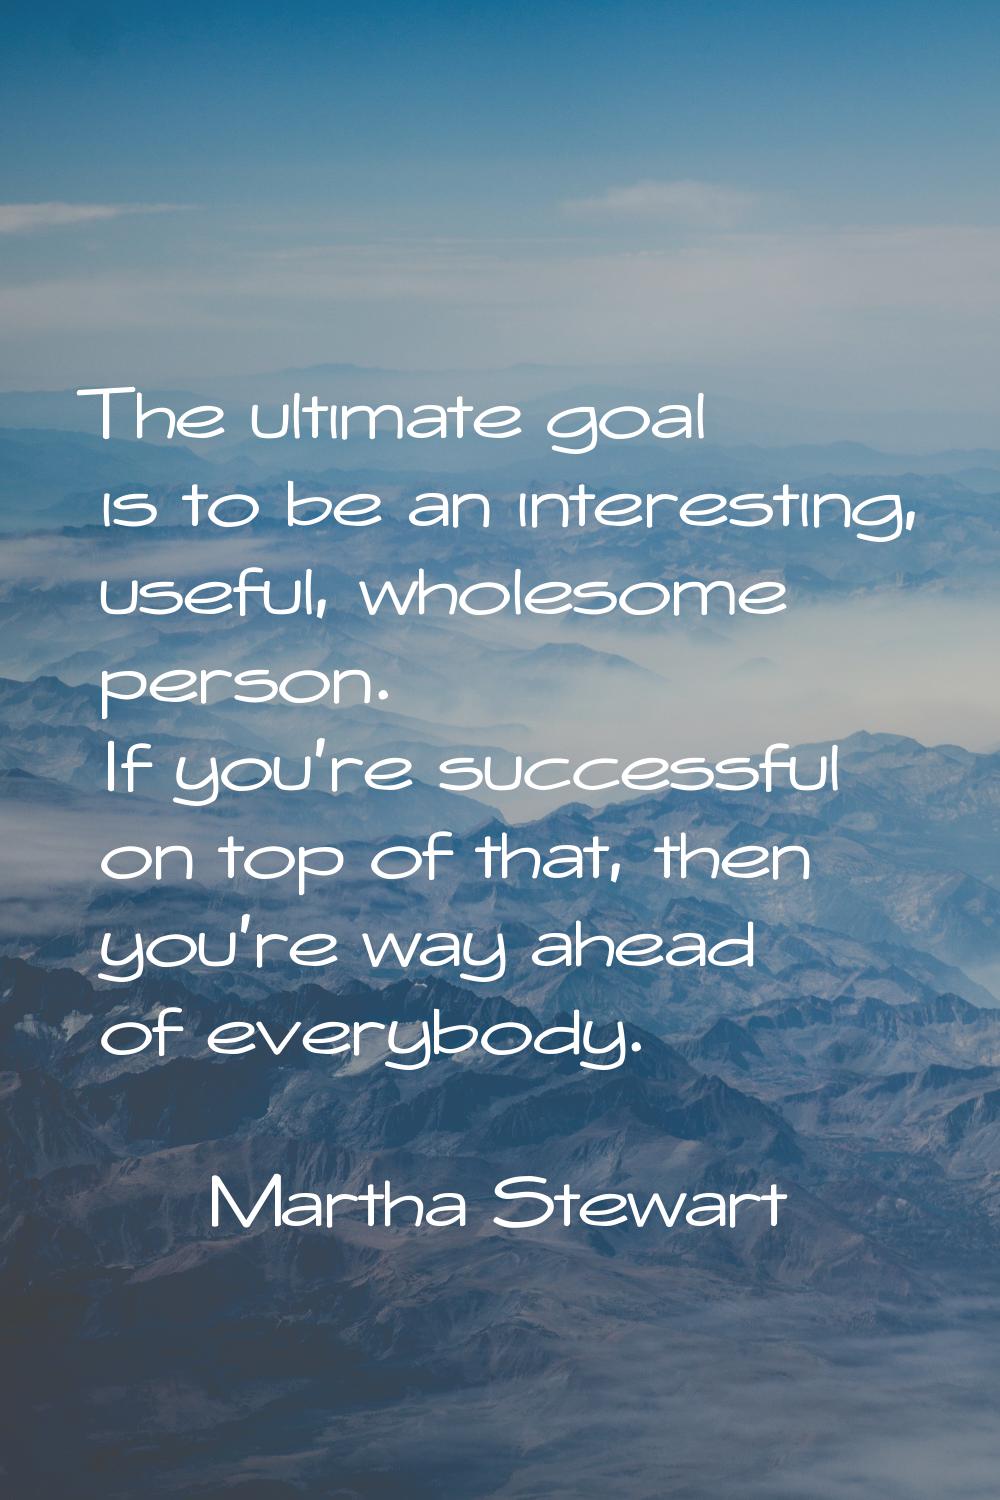 The ultimate goal is to be an interesting, useful, wholesome person. If you're successful on top of